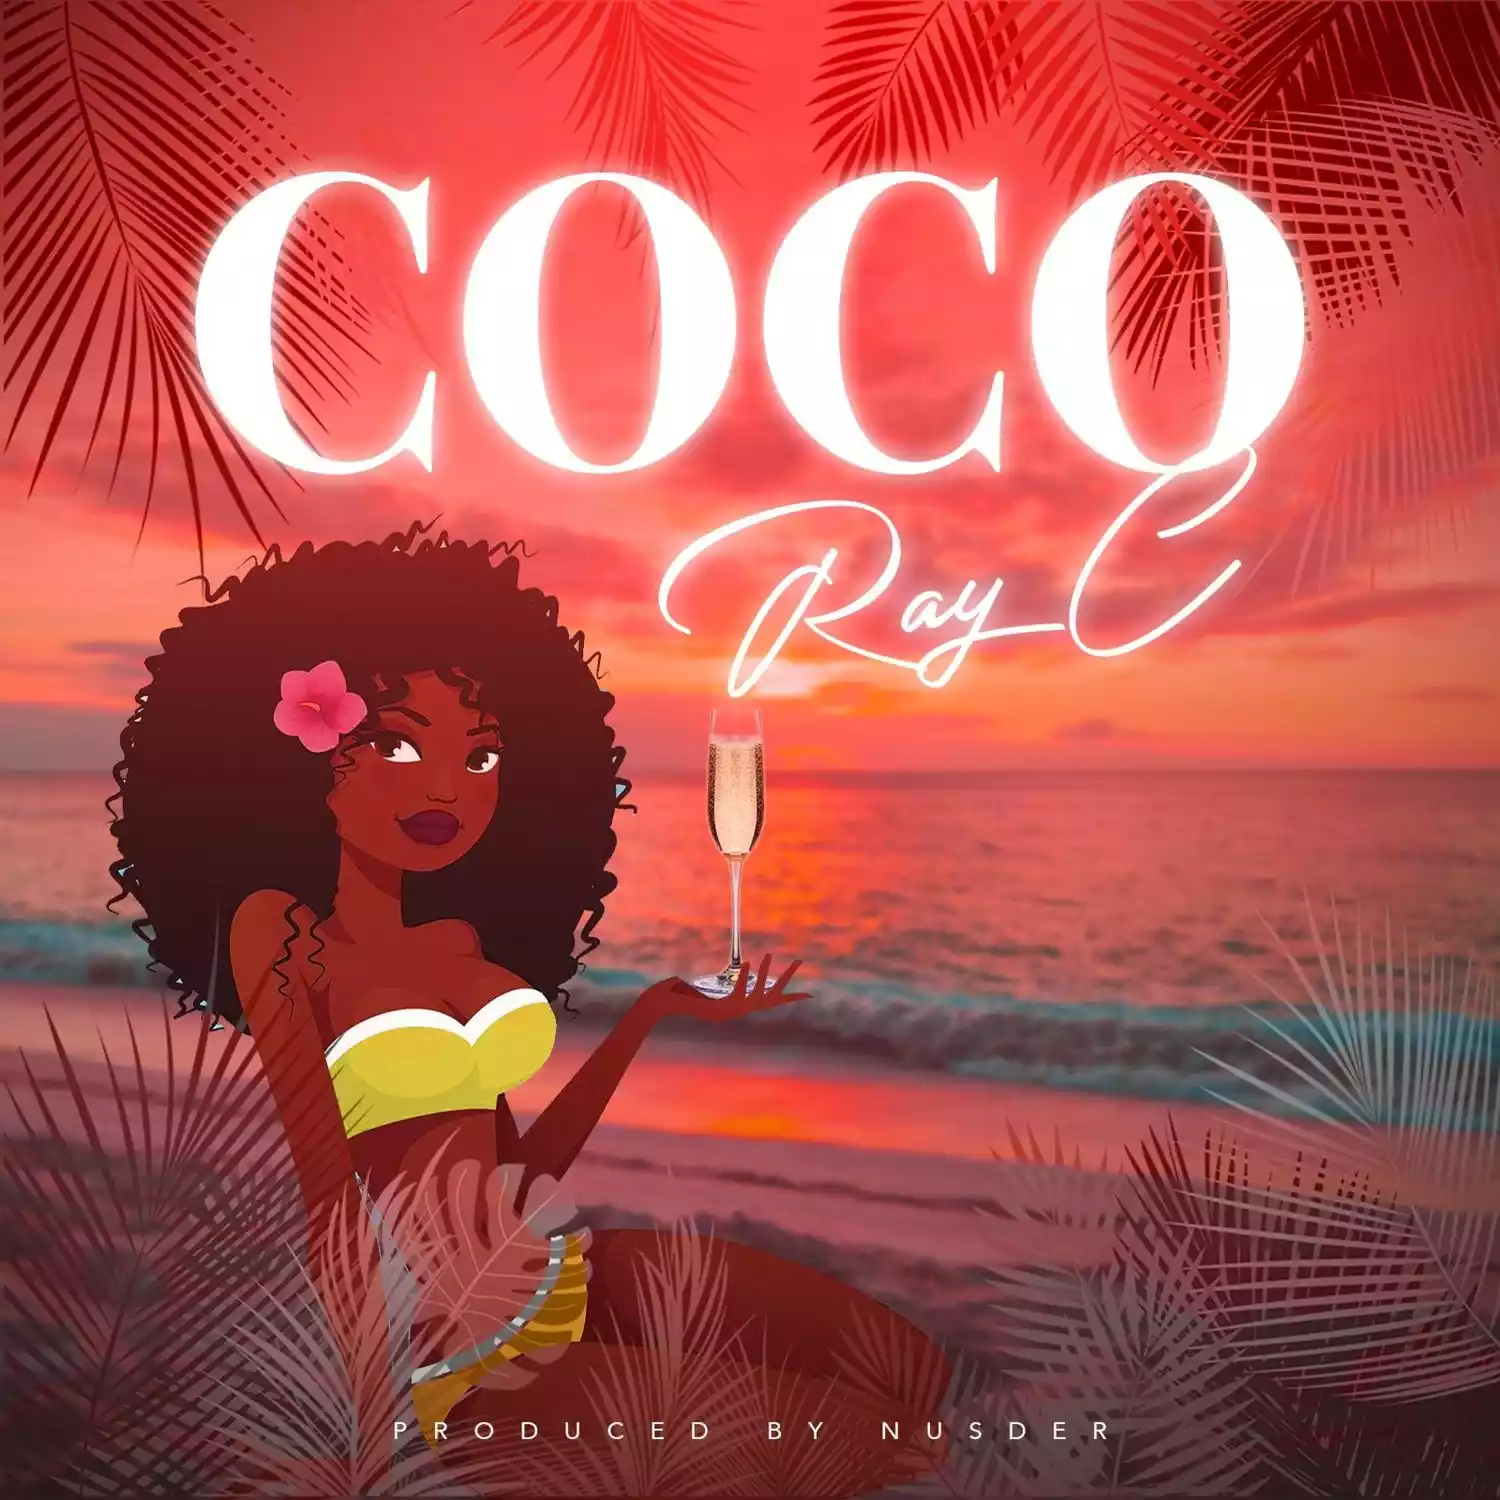 Ray C Coco Mp3 Download